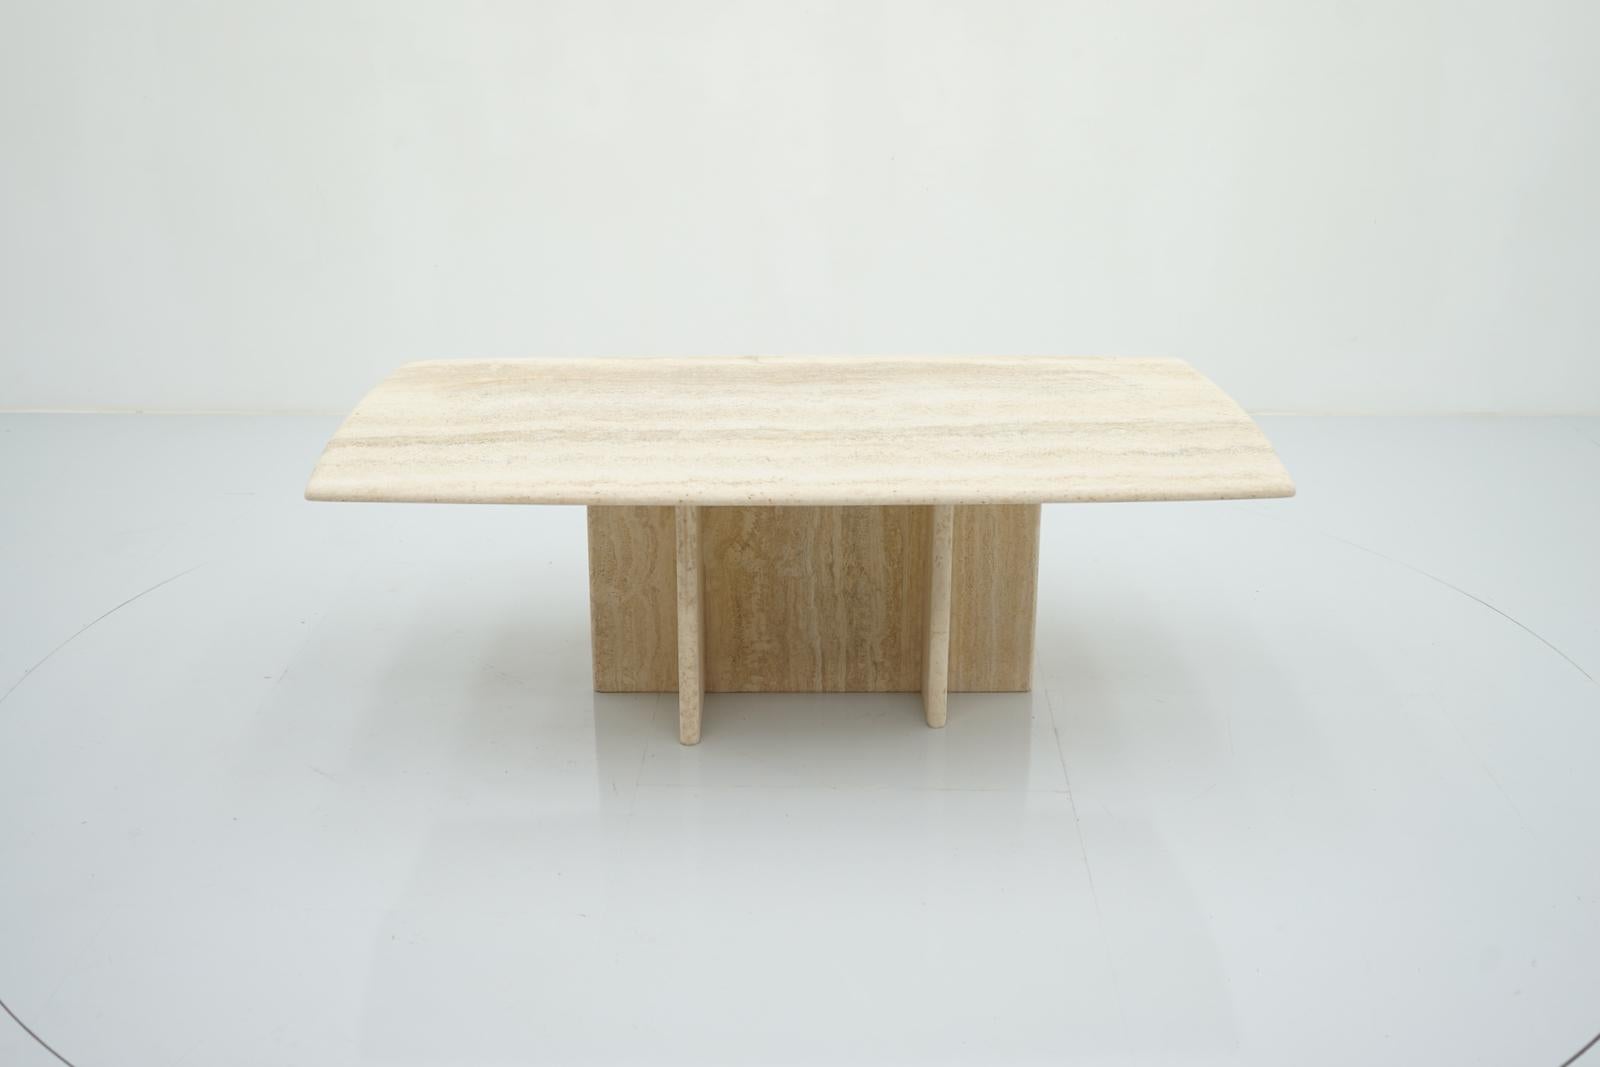 Rectangular coffee table in Italian travertine, 1970s. Can be use in and outdoor.
Very good condition.

Details

Creator: unknown
Period: 1970s
Color: beige
Style: Mid-Century Modern
Place of Origin: Italy
Dimensions: Wide 54.3 in. (138 cm), Height: